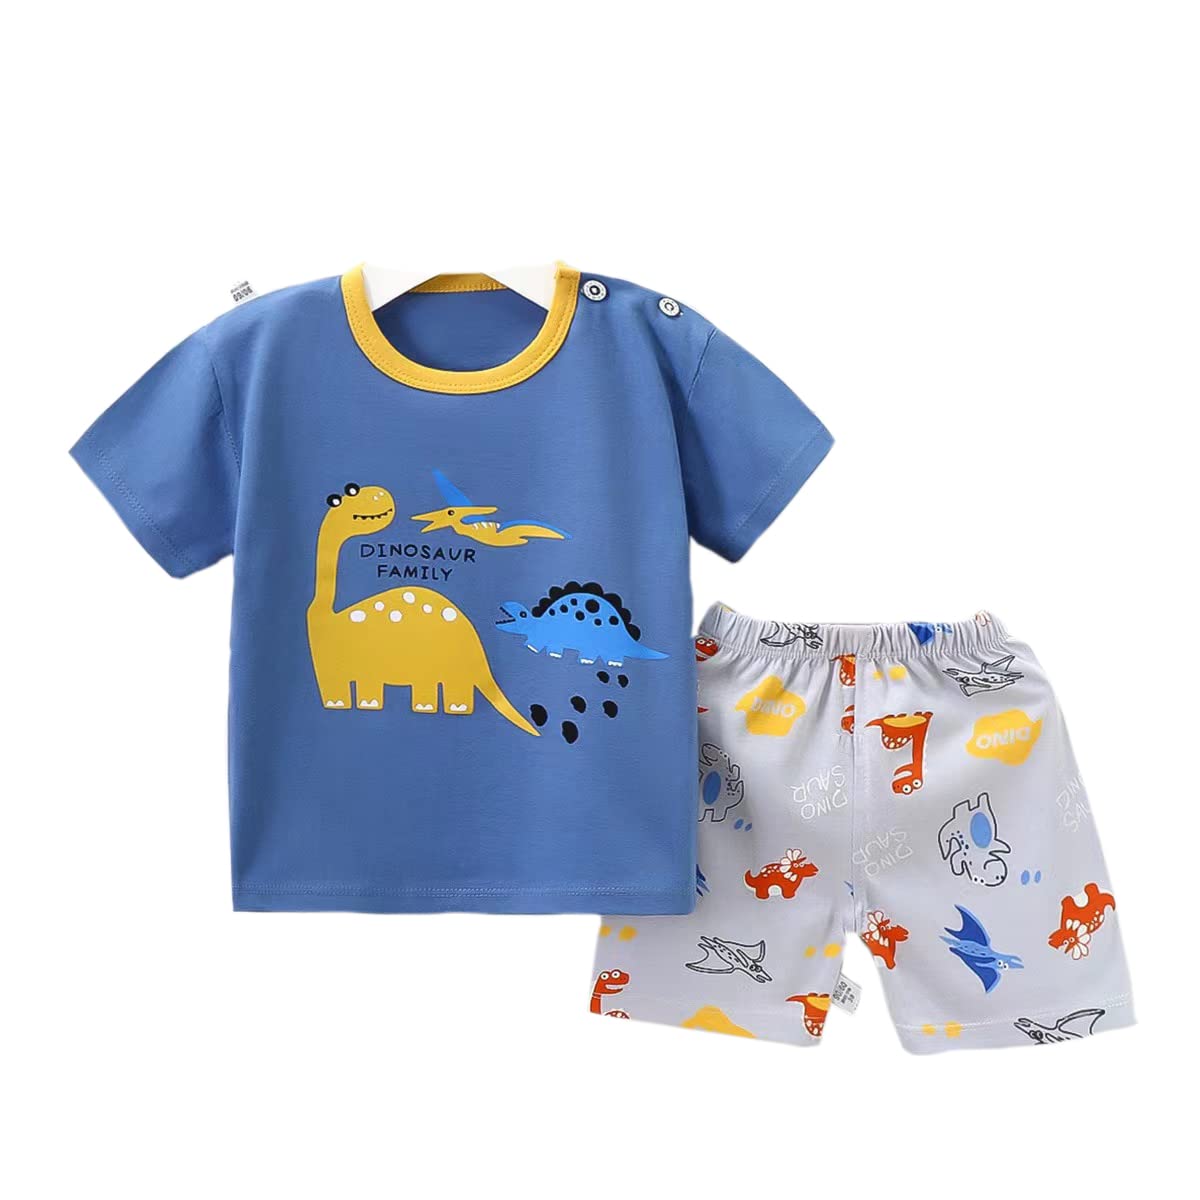 Infant Baby Boys' Summer Short Sets Clothes for Toddler Boy's 2 Piece Cotton Clothing Set Top Shorts Outfits